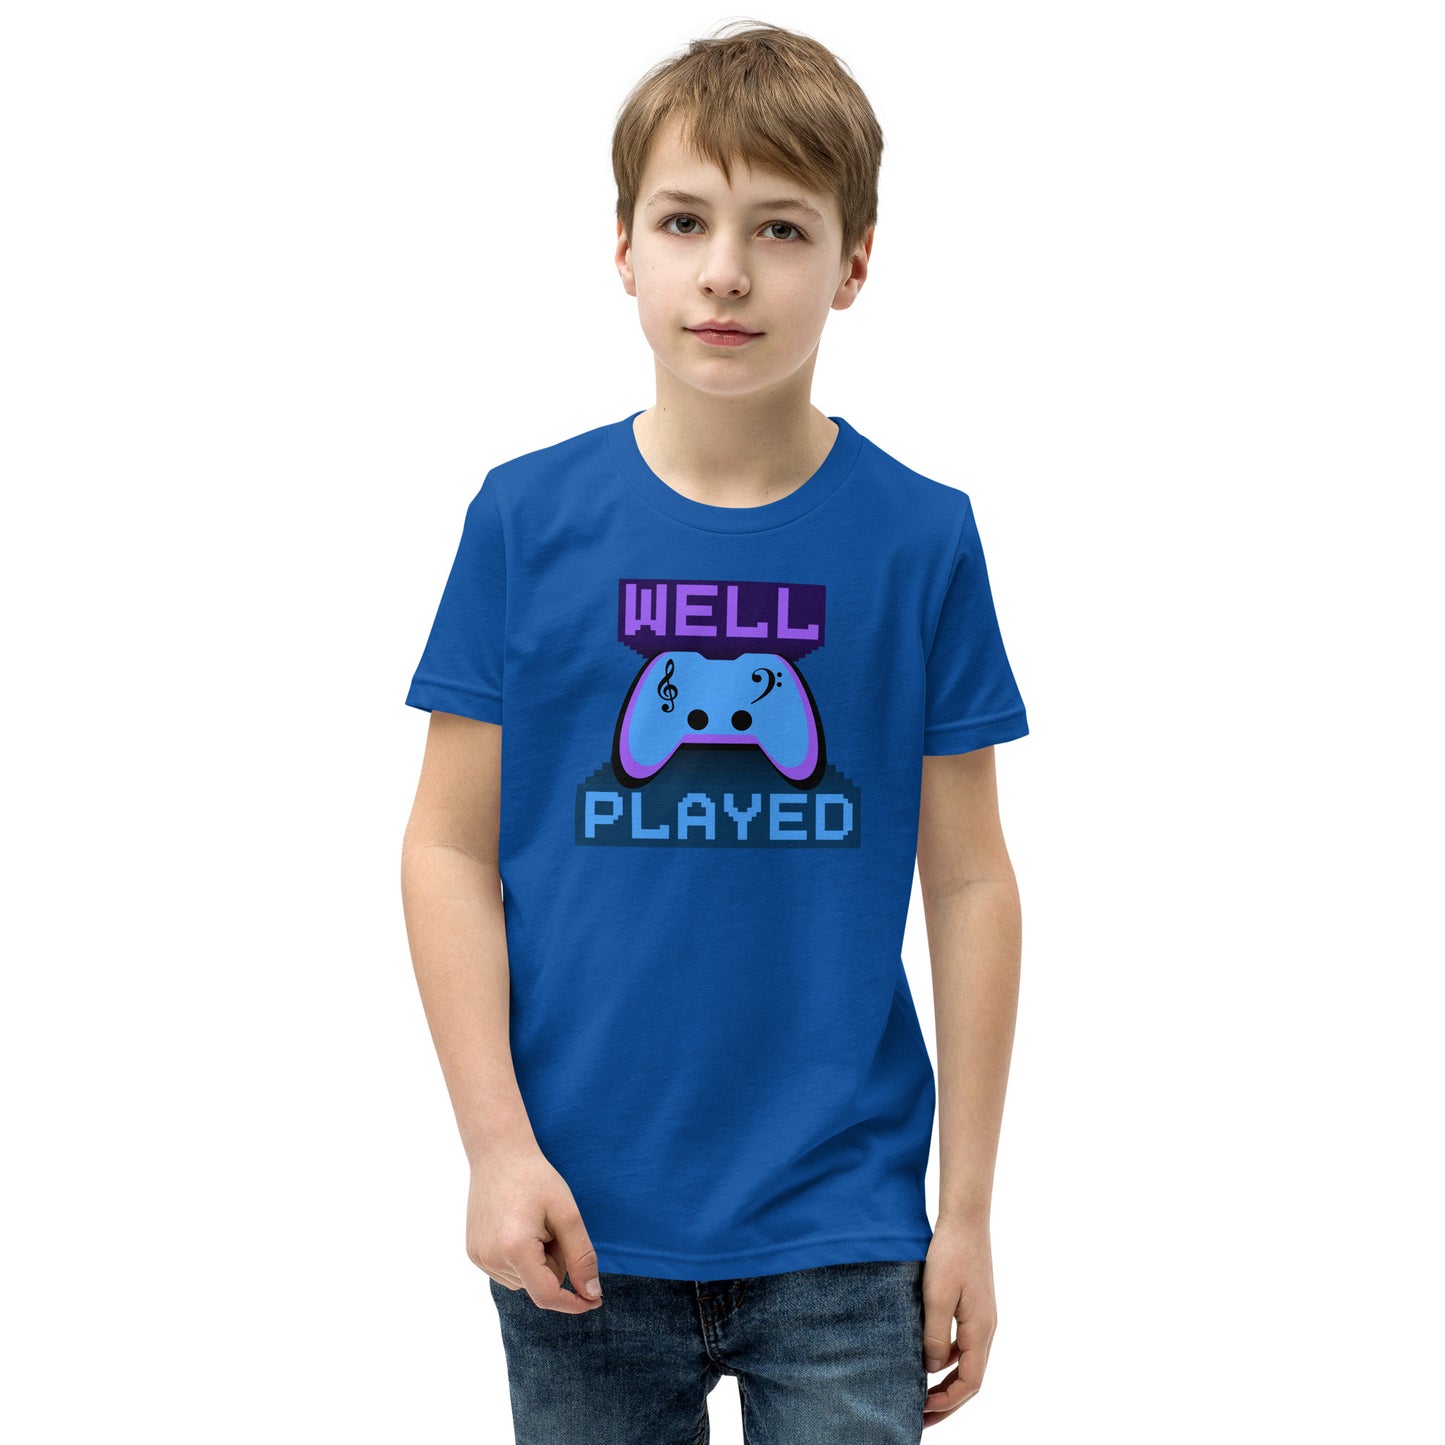 Well Played Printed Youth Short Sleeve T-Shirt